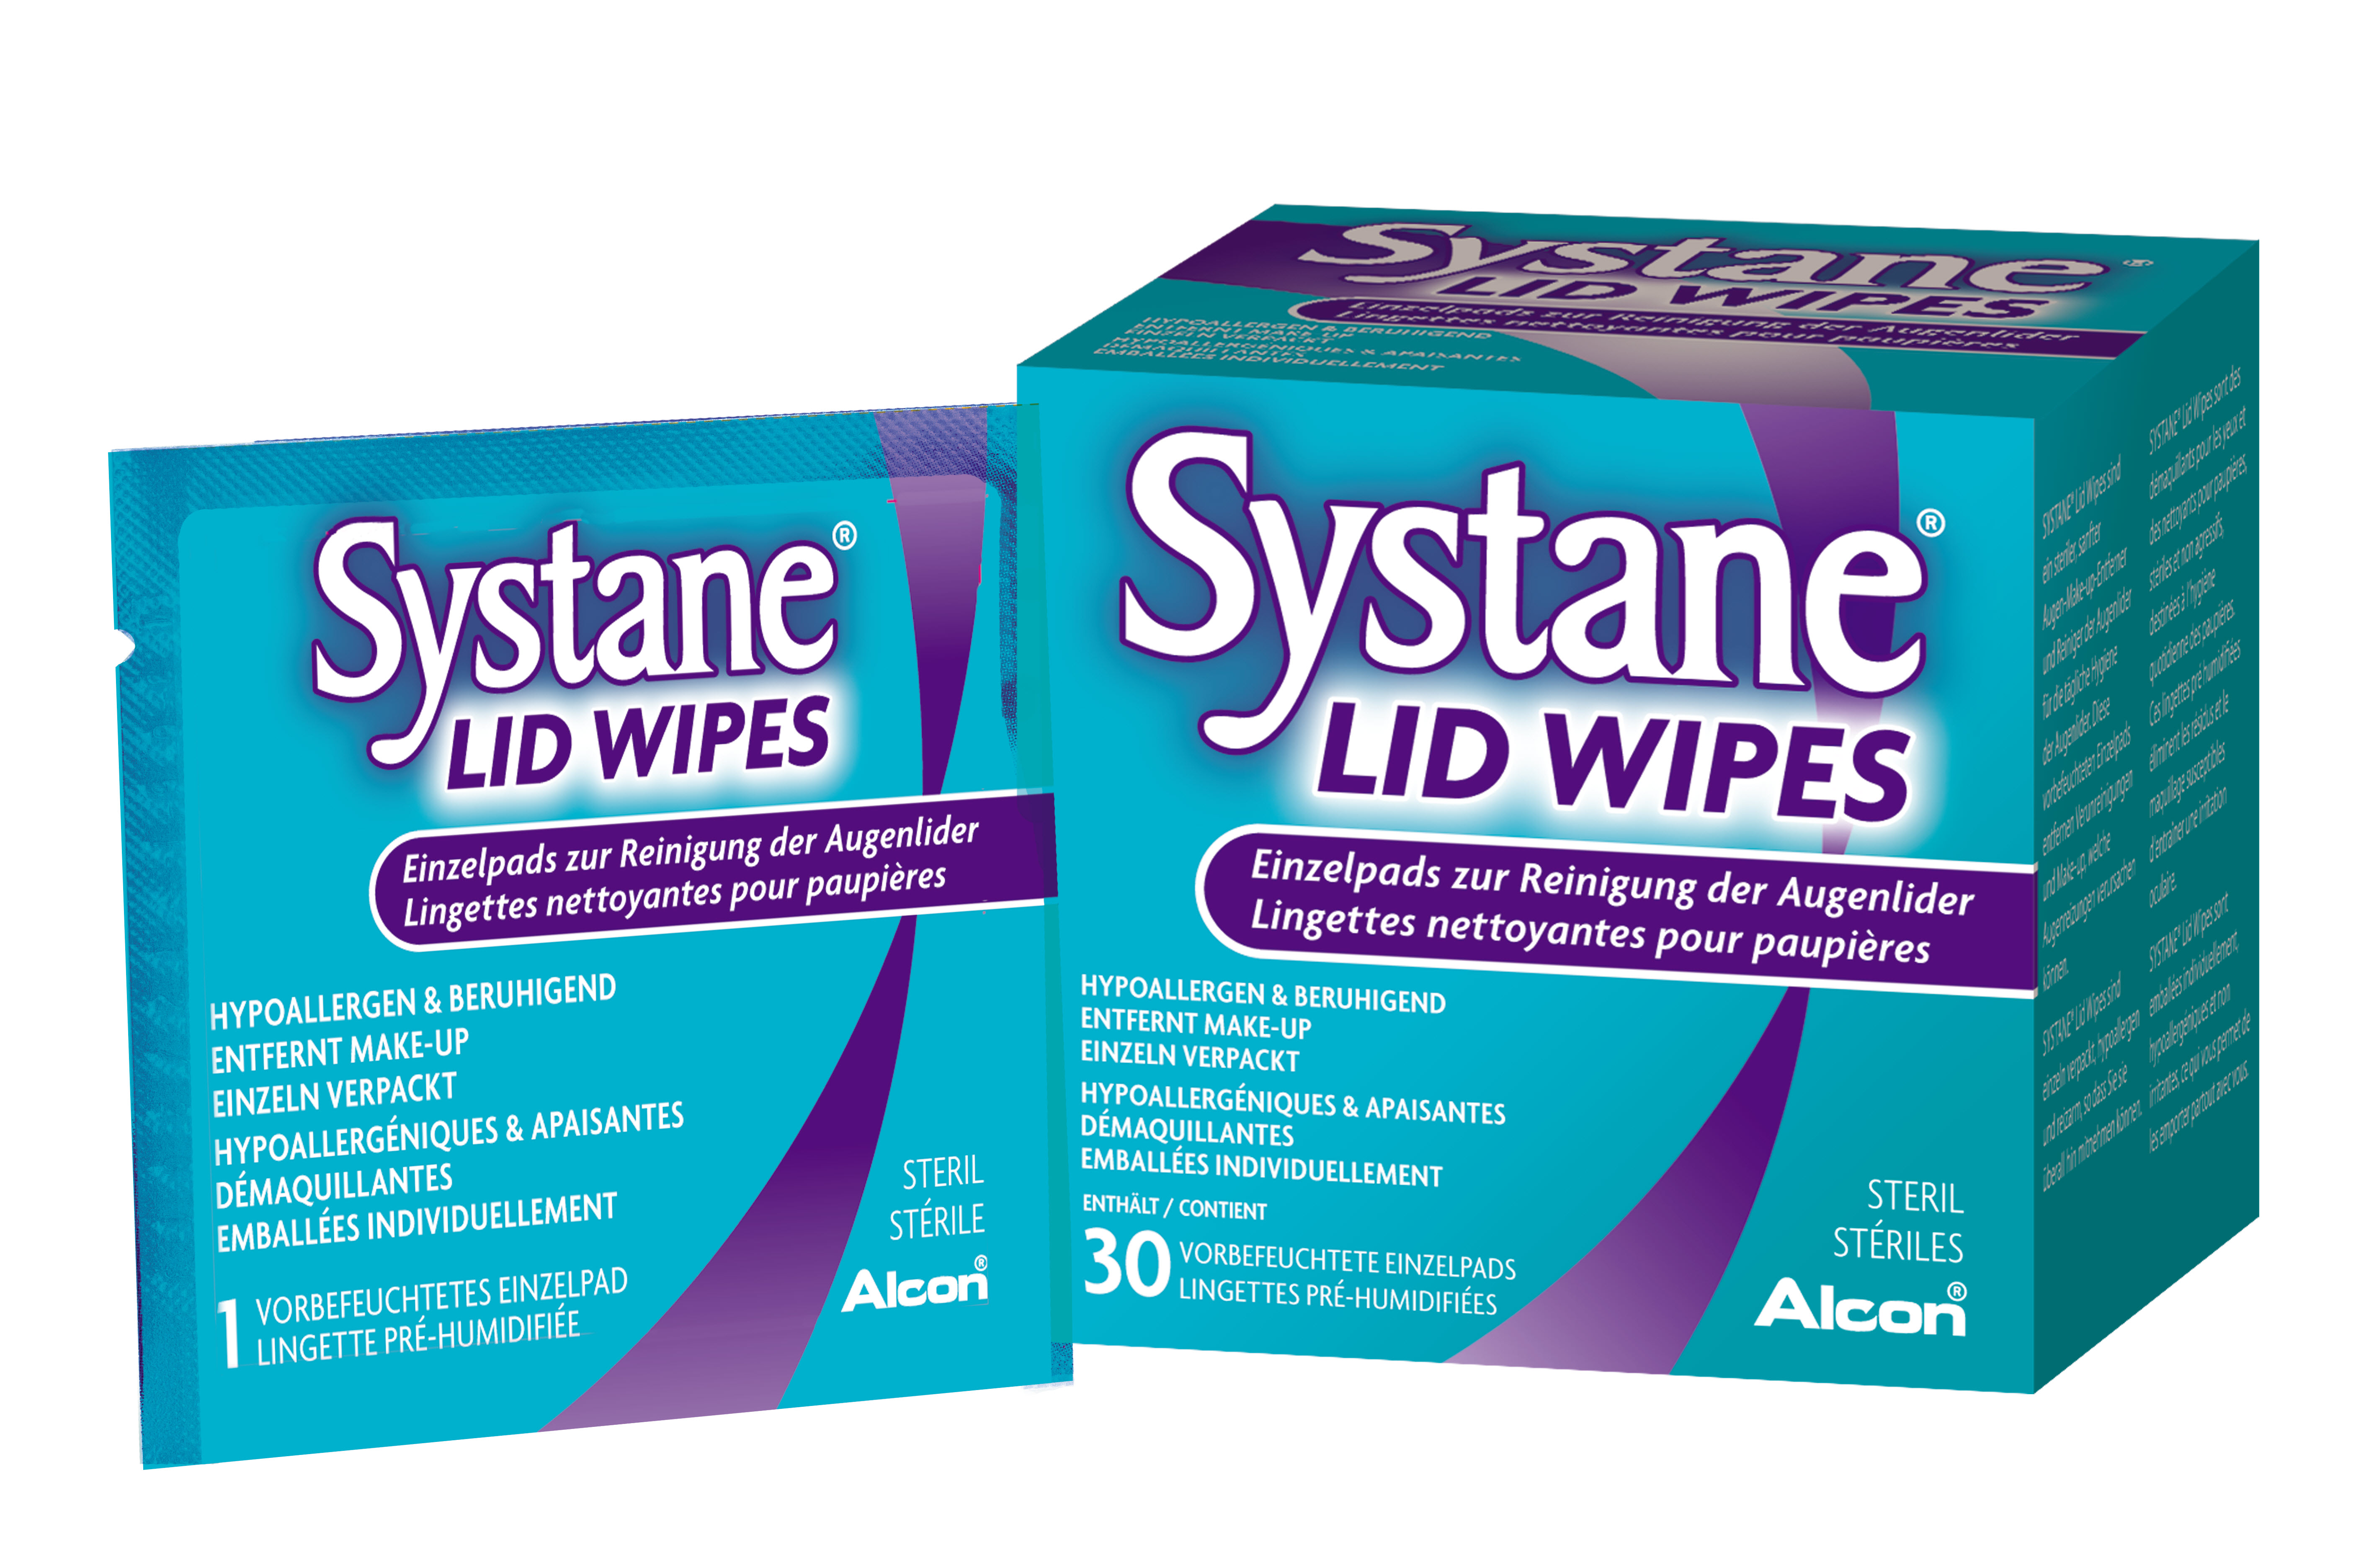 Systane lid wipes